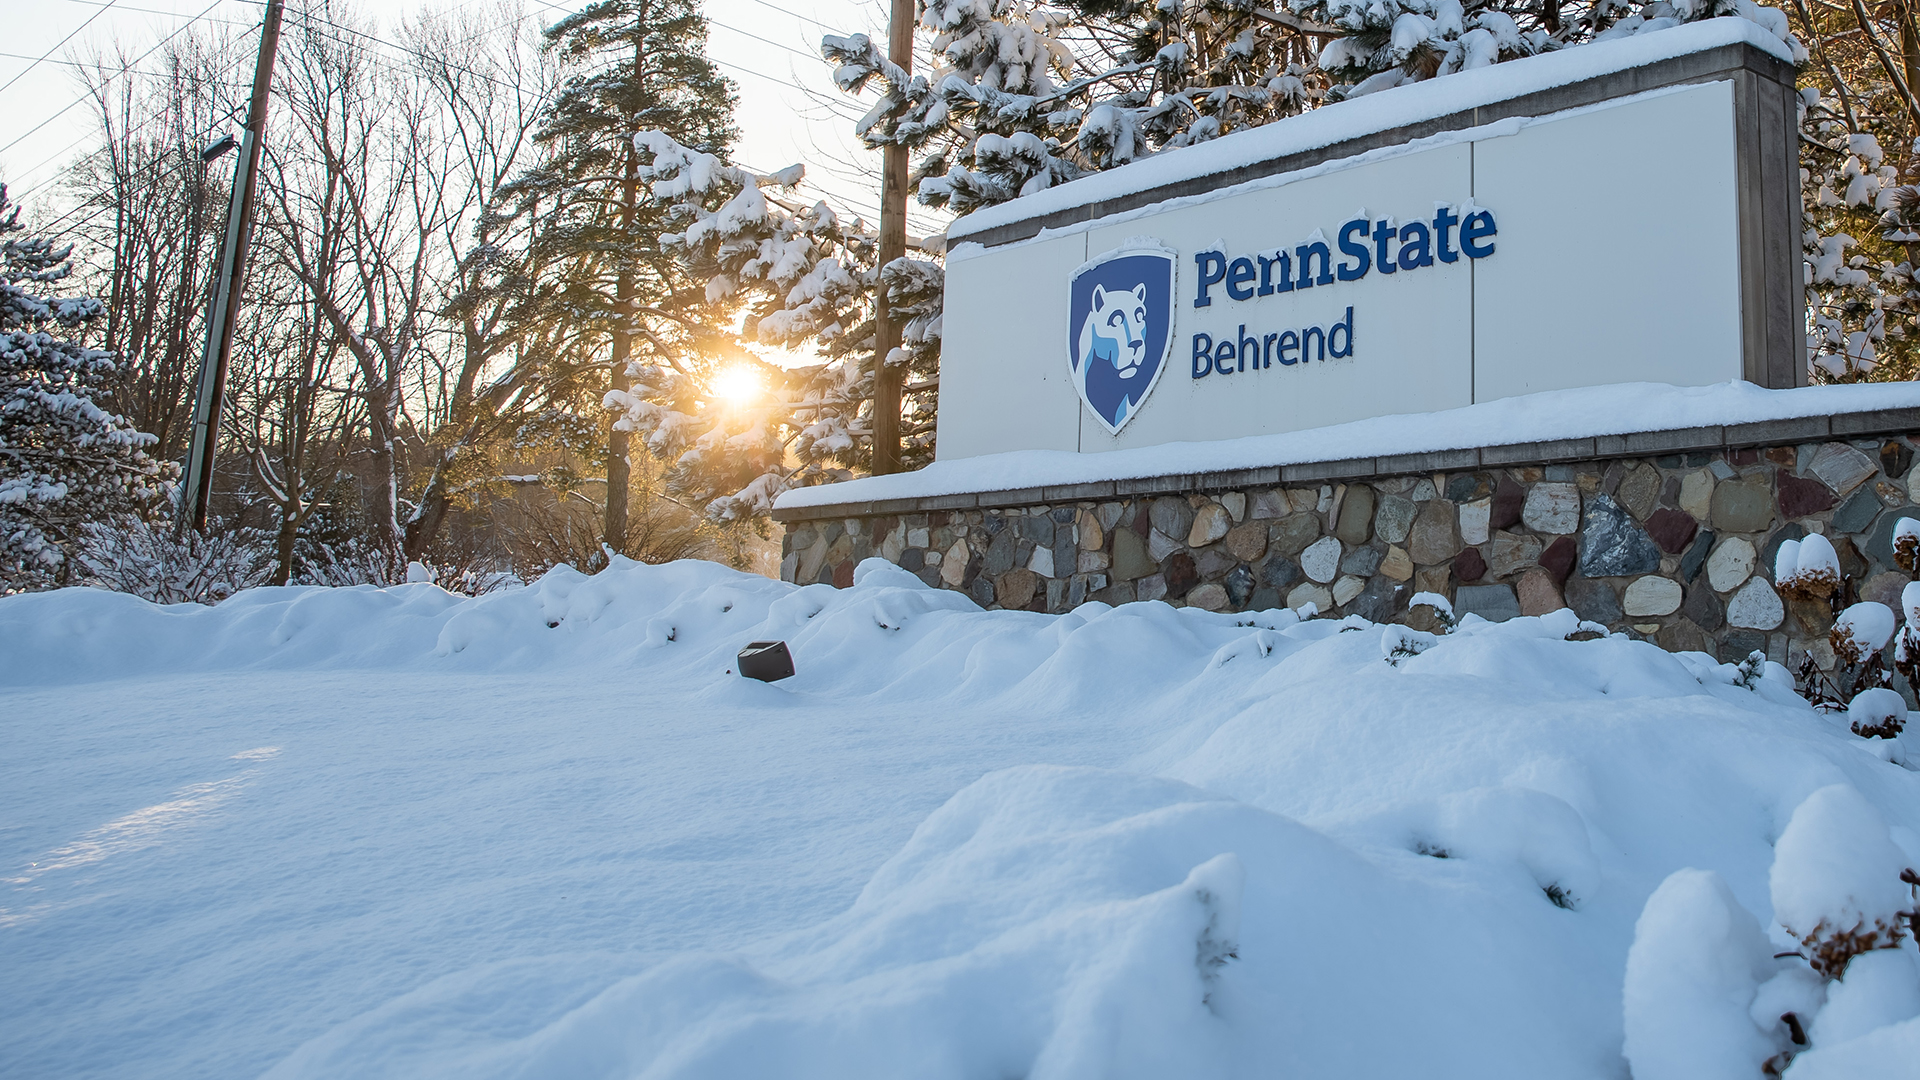 Penn State Behrend entrance sign in winter